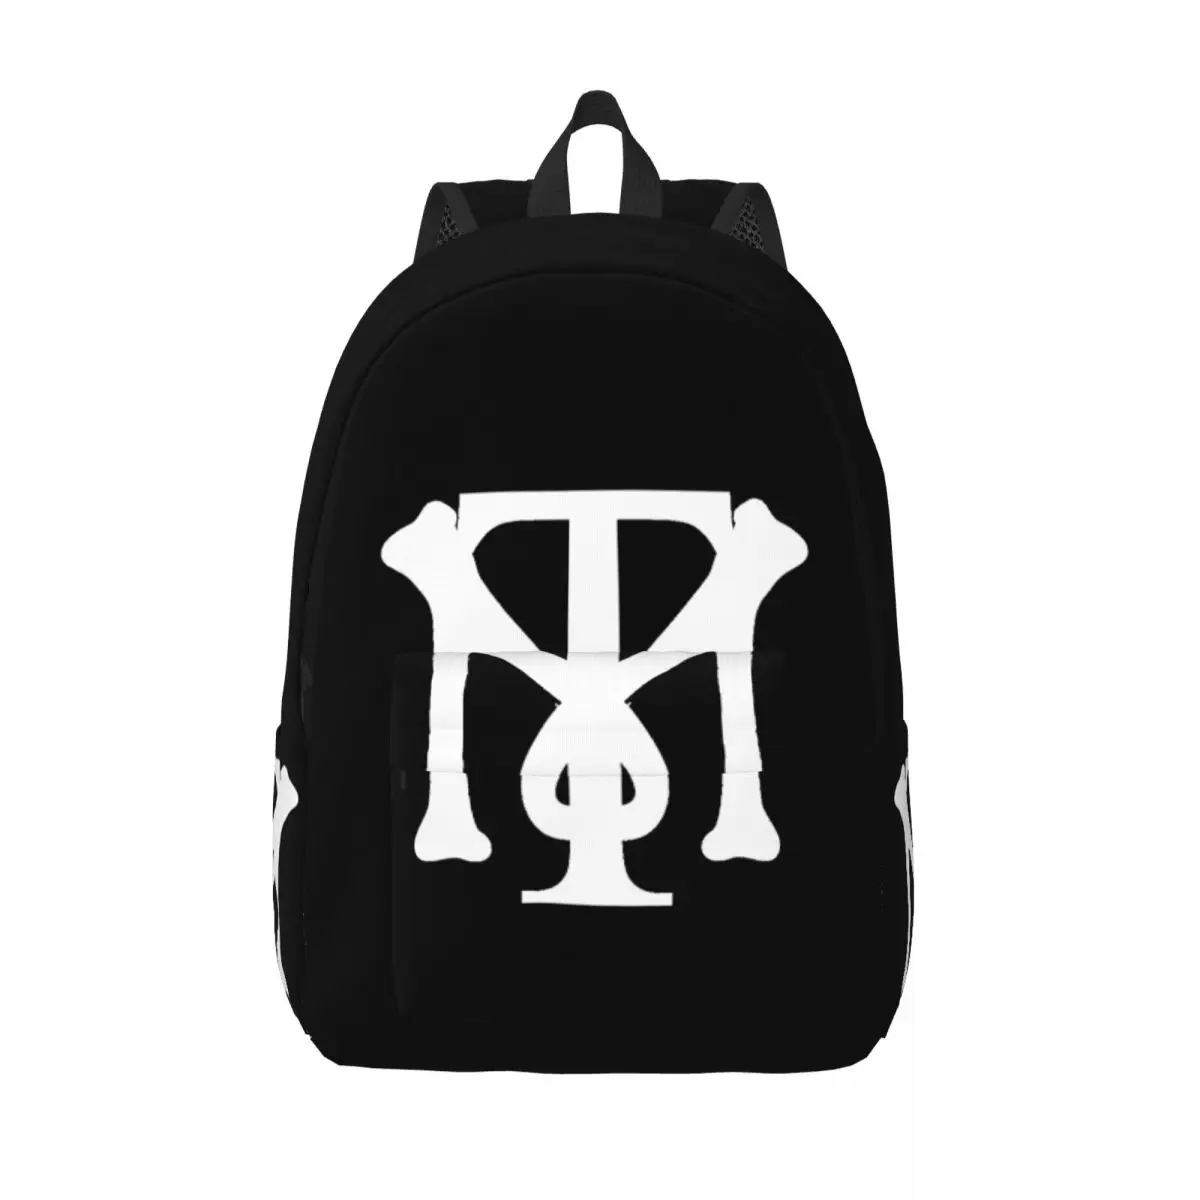 

Tony Montana Logo Canvas Backpacks for Boys Girls Scarface Funny Film School College Travel Bags Bookbag Fits 15 Inch Laptop